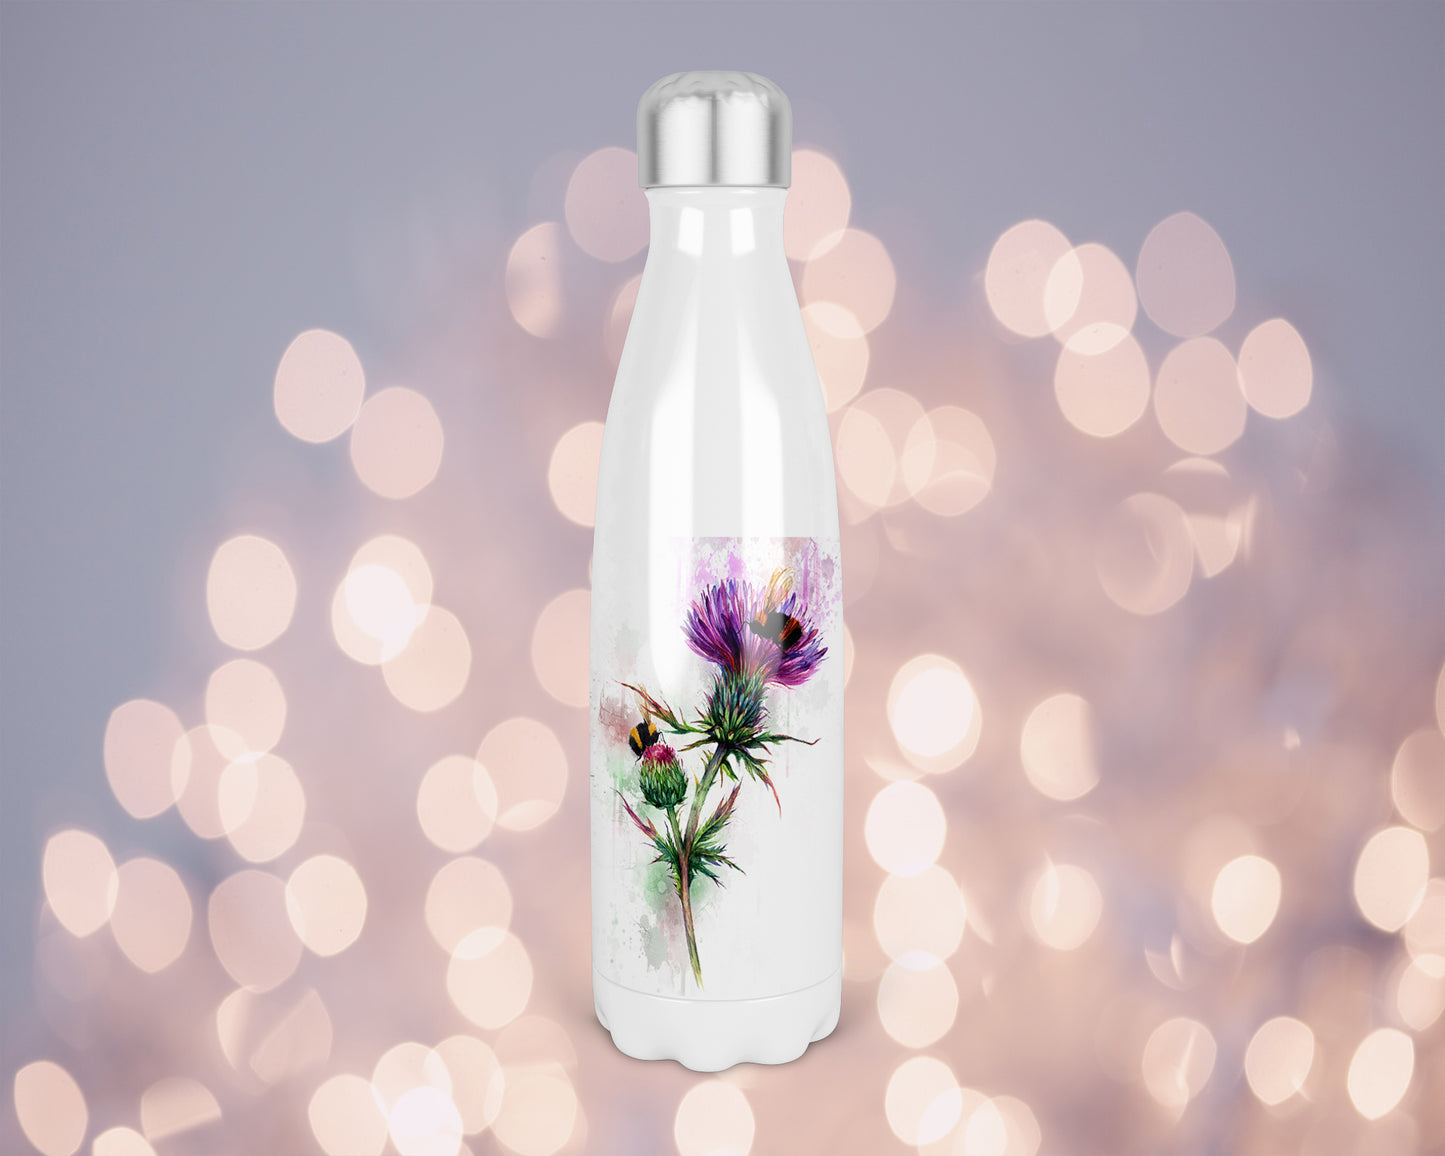 Watercolour Thistles and Bees 500ml Bowling Pin Shape Drinks Bottle, Made In Scotland, Thistle Gift, Buzzy Bees, Scottish Gift, Bee Lovers